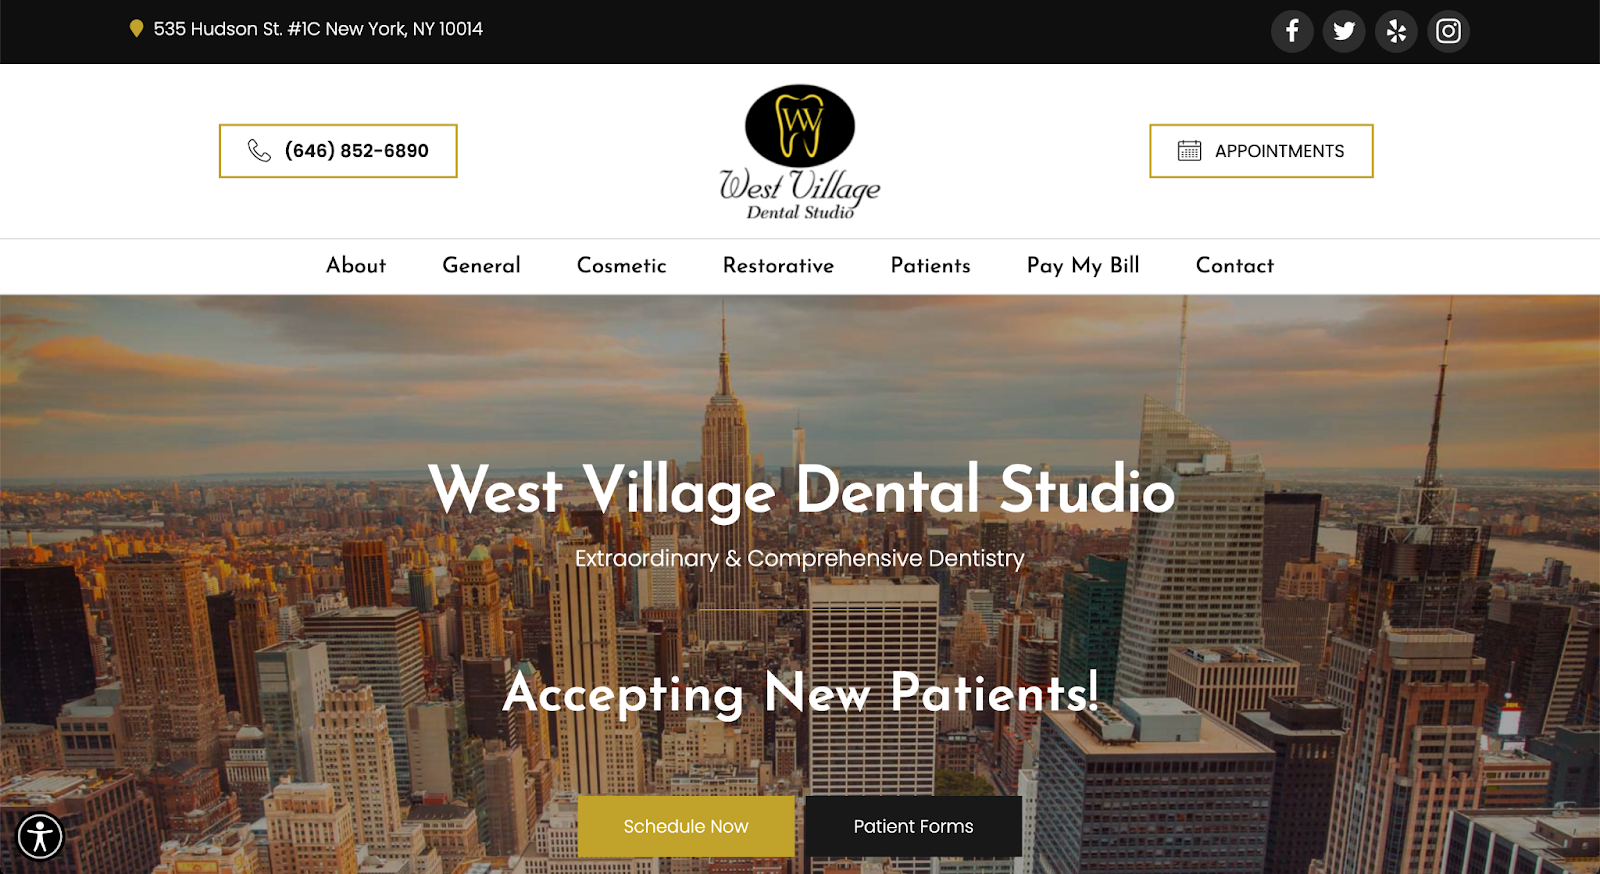 Use clever content buckets to help your dental website stand out, like in this design from West Village Dental Studio